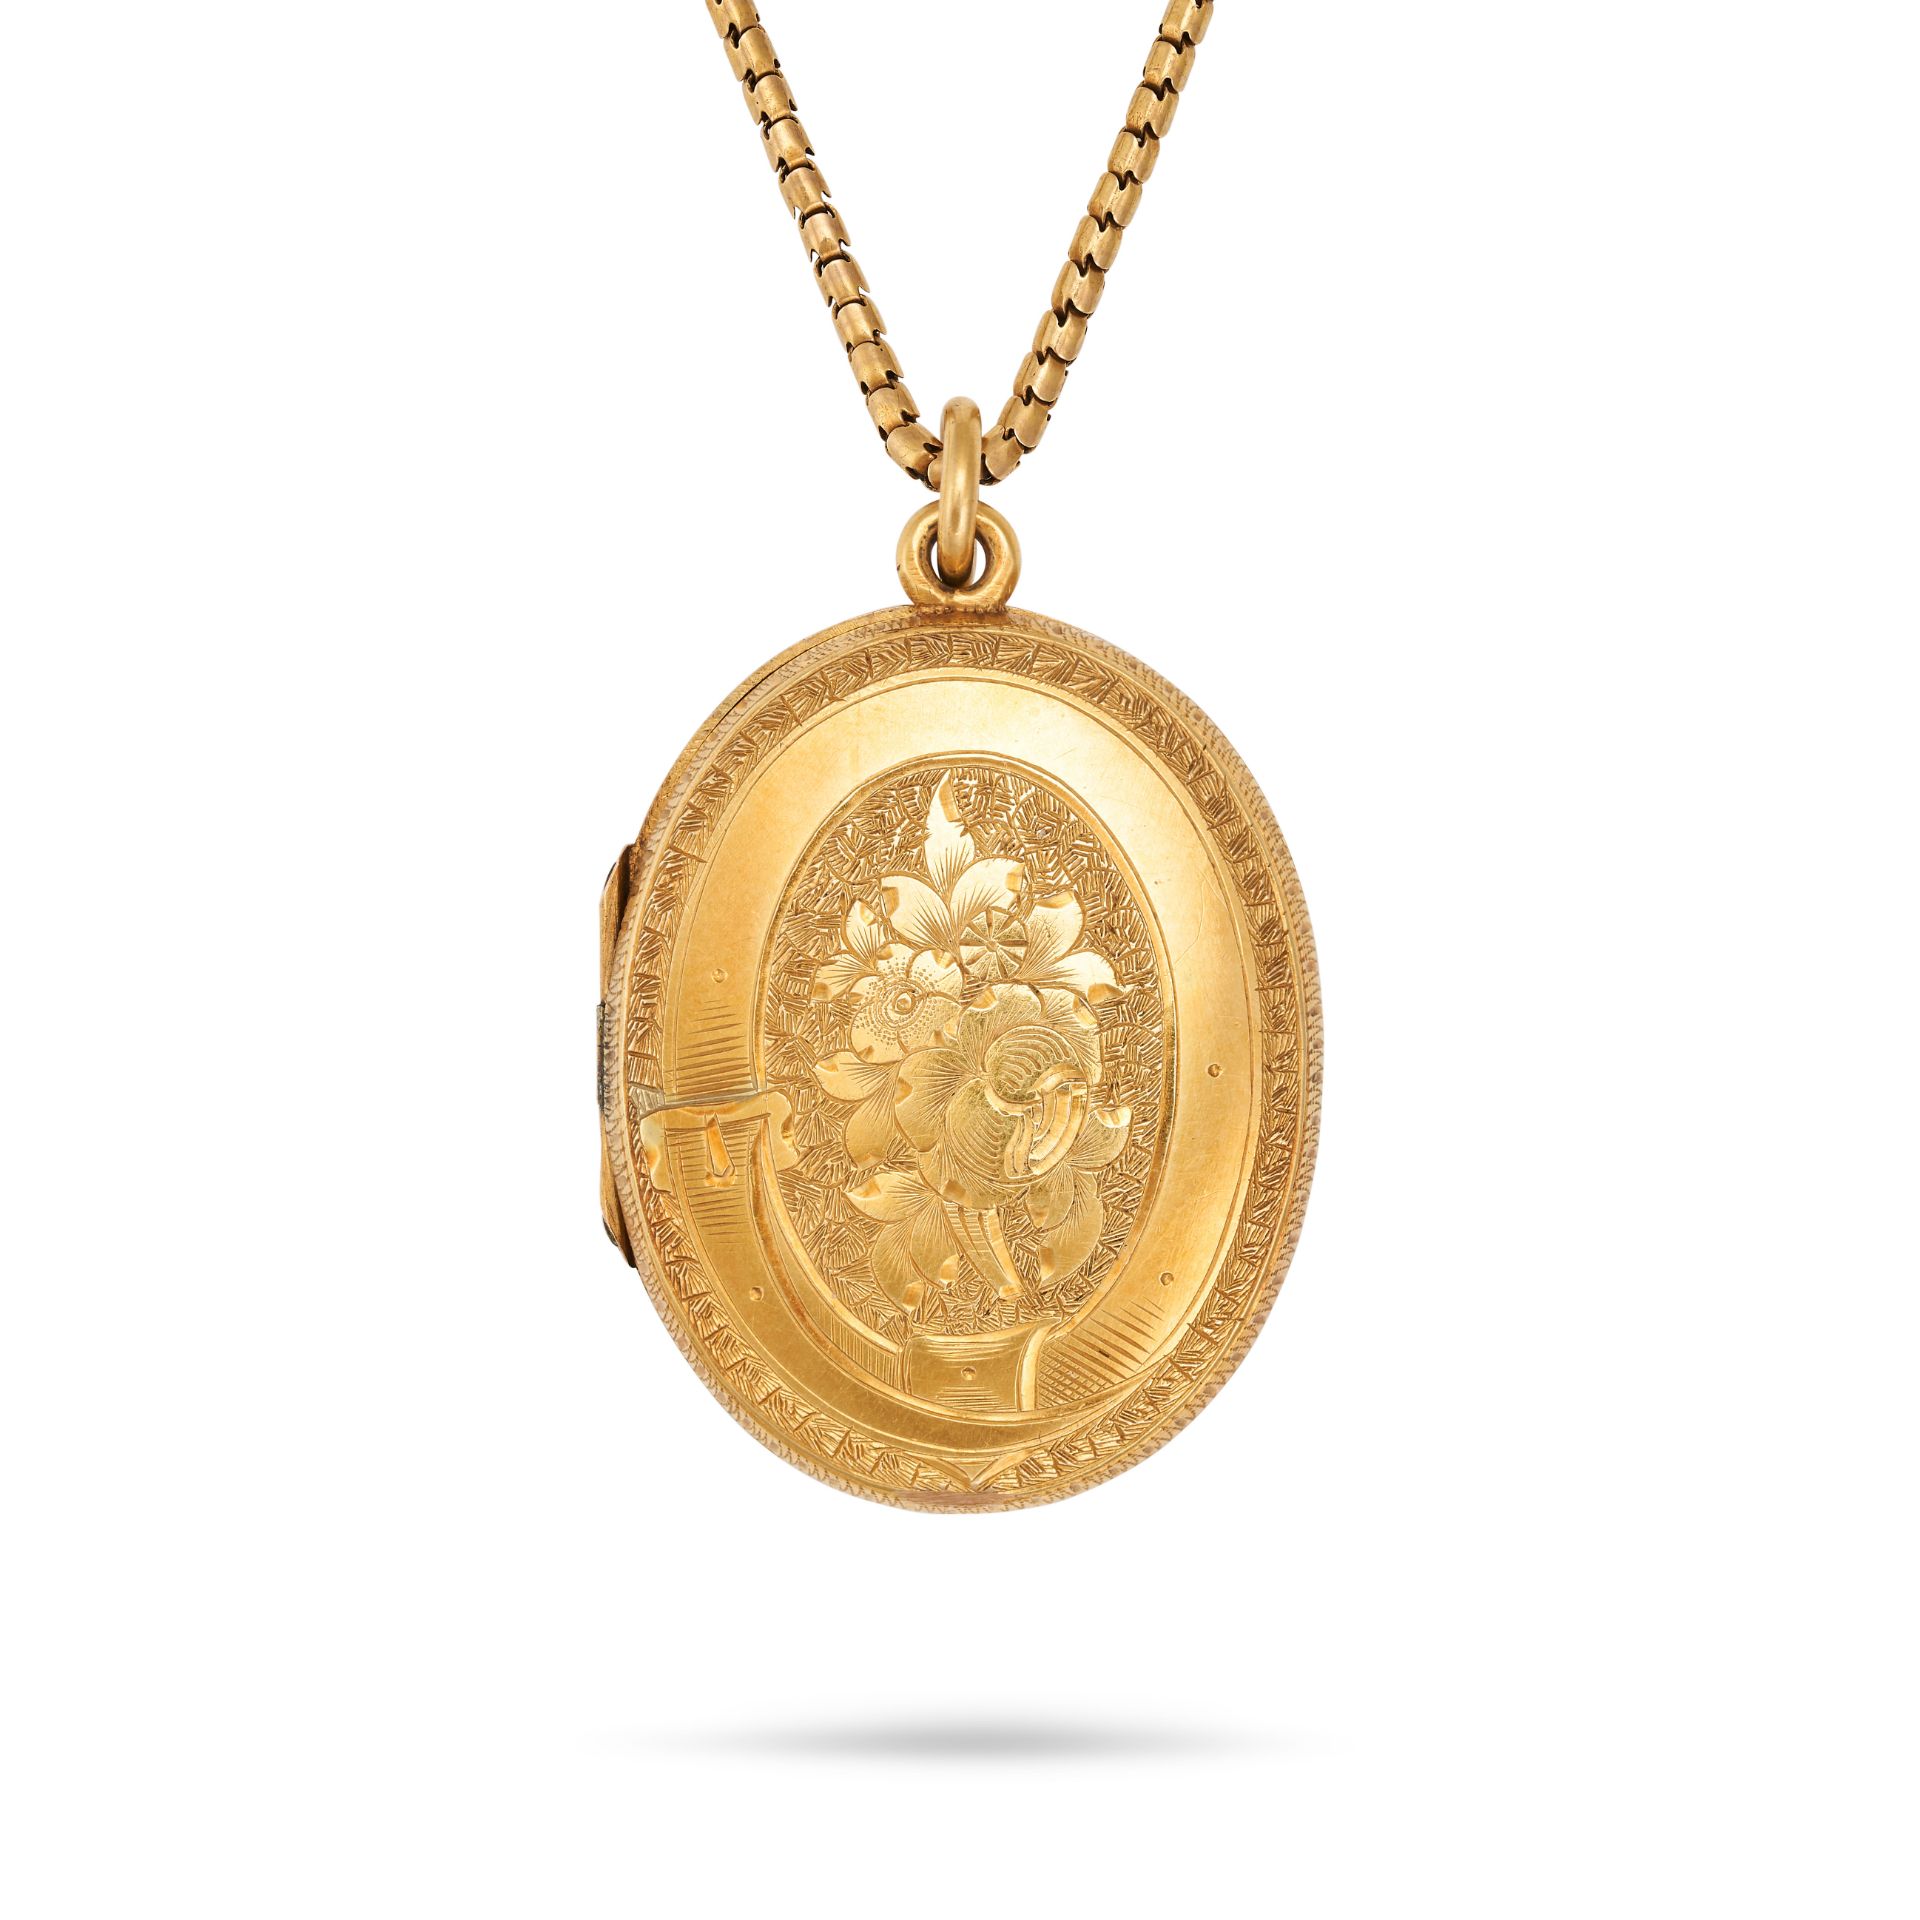 AN ANTIQUE LOCKET PENDANT NECKLACE the oval hinged locket designed as a belt engraved with foliat...